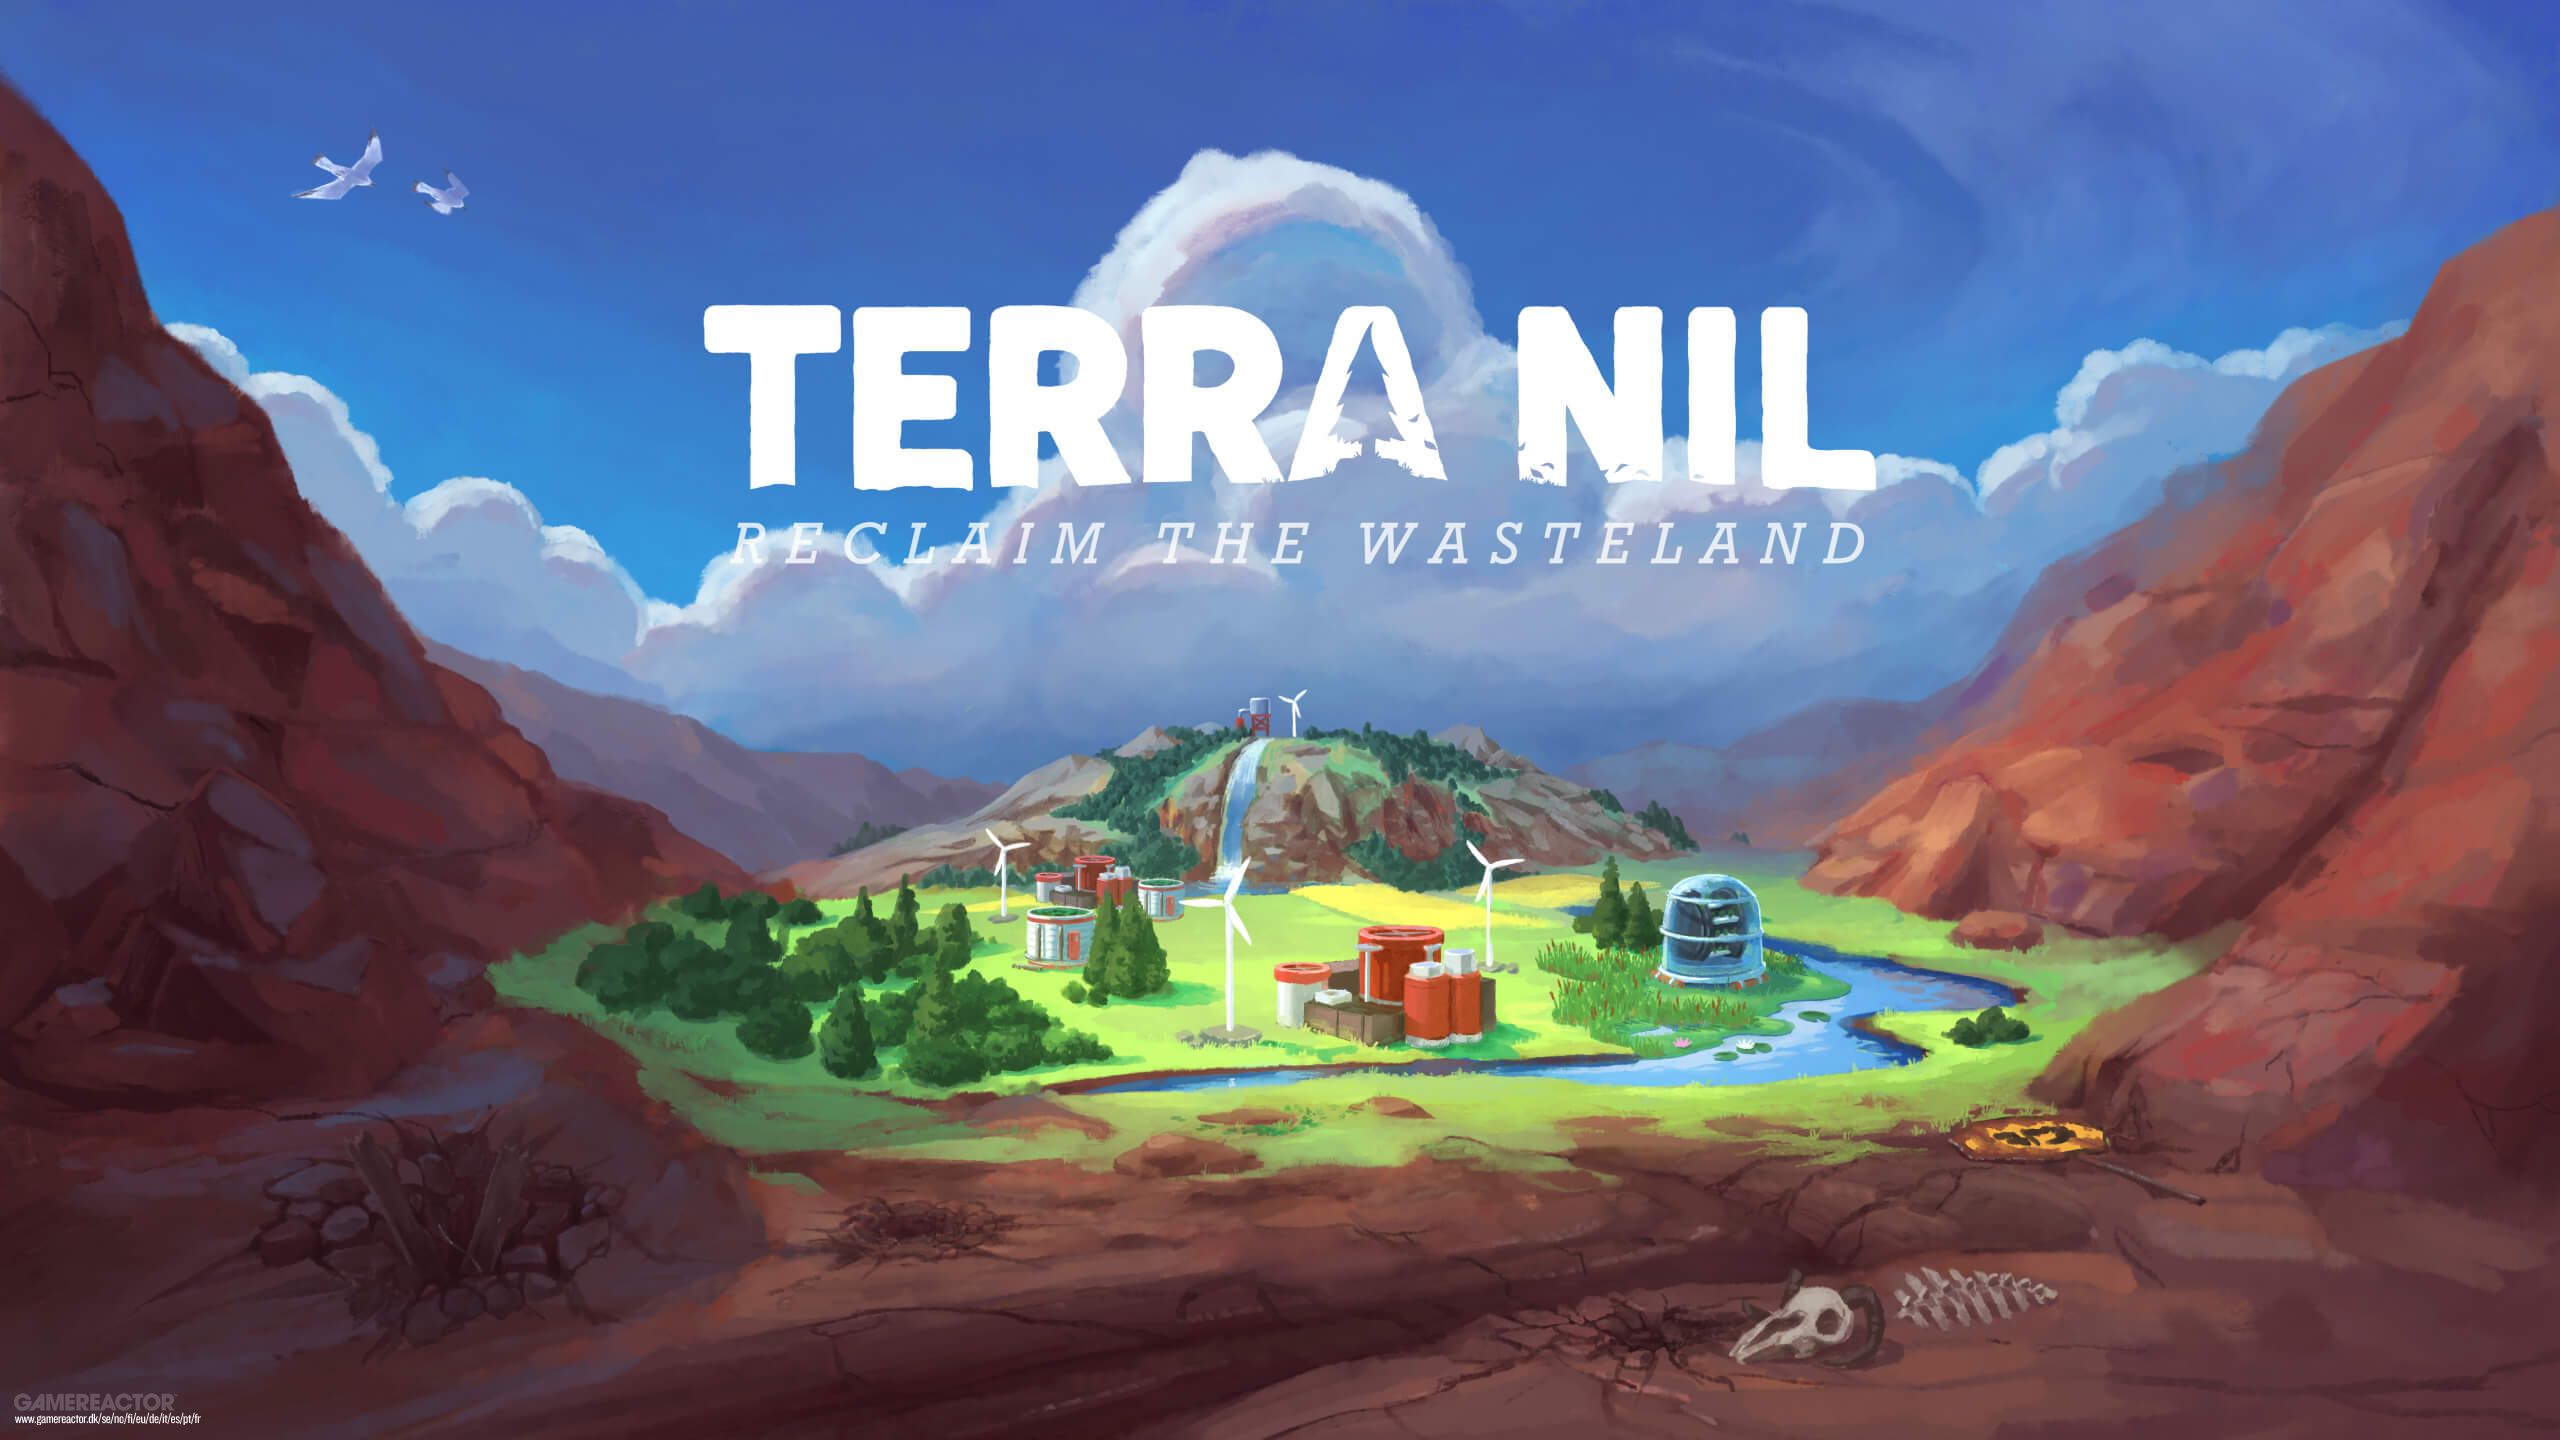 Transform a wasteland into an orchard with Terra Nil, the eco-responsible strategy title